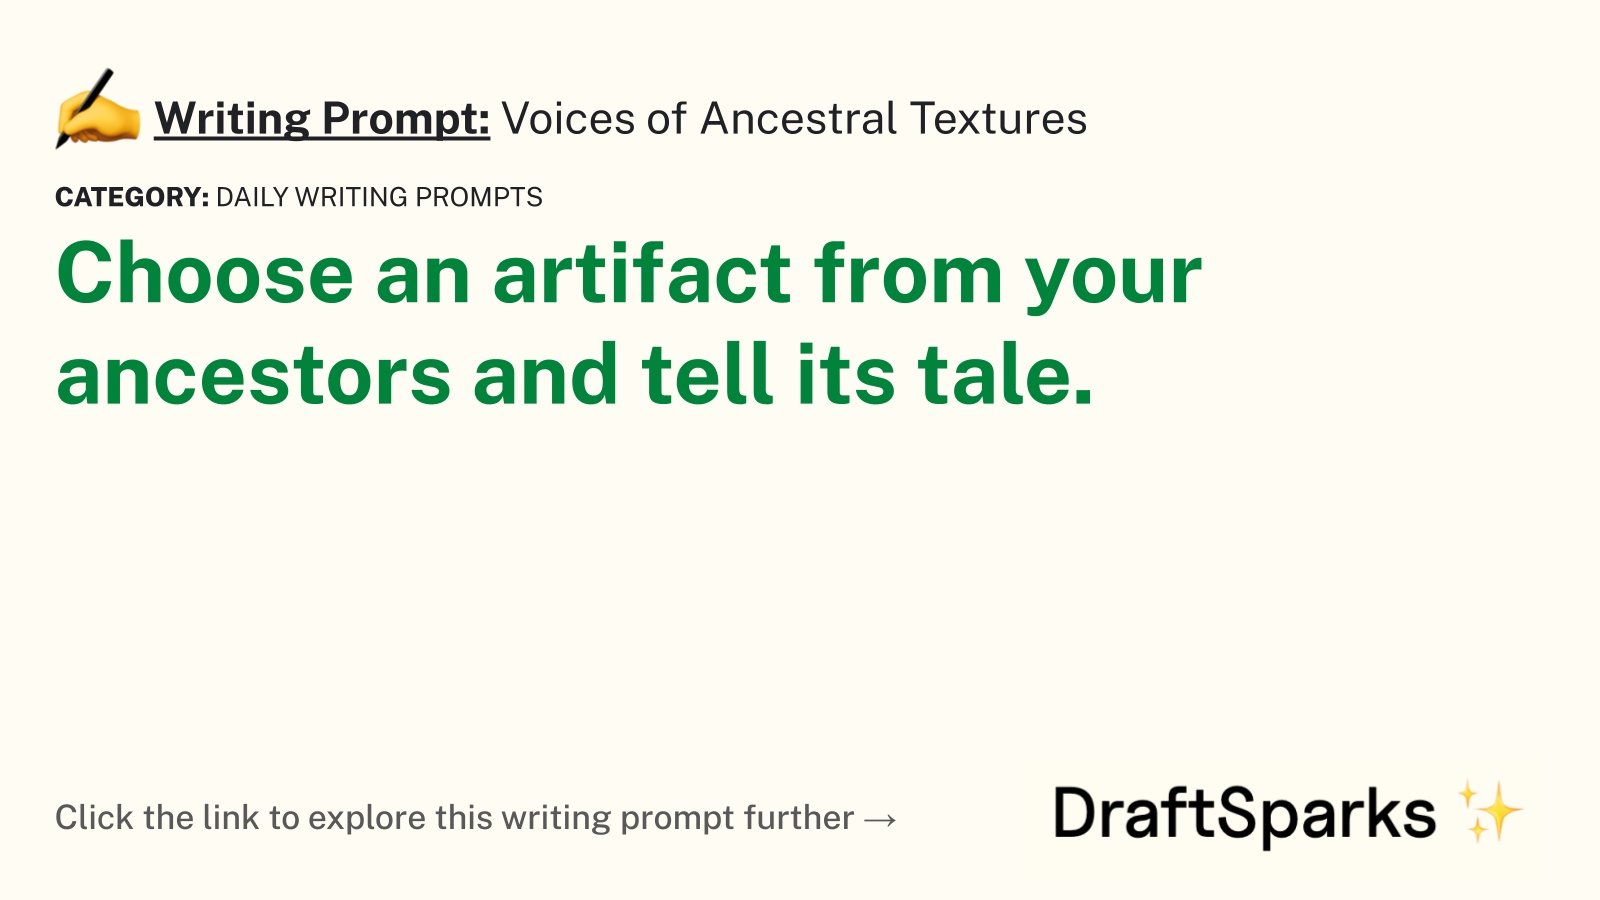 Voices of Ancestral Textures